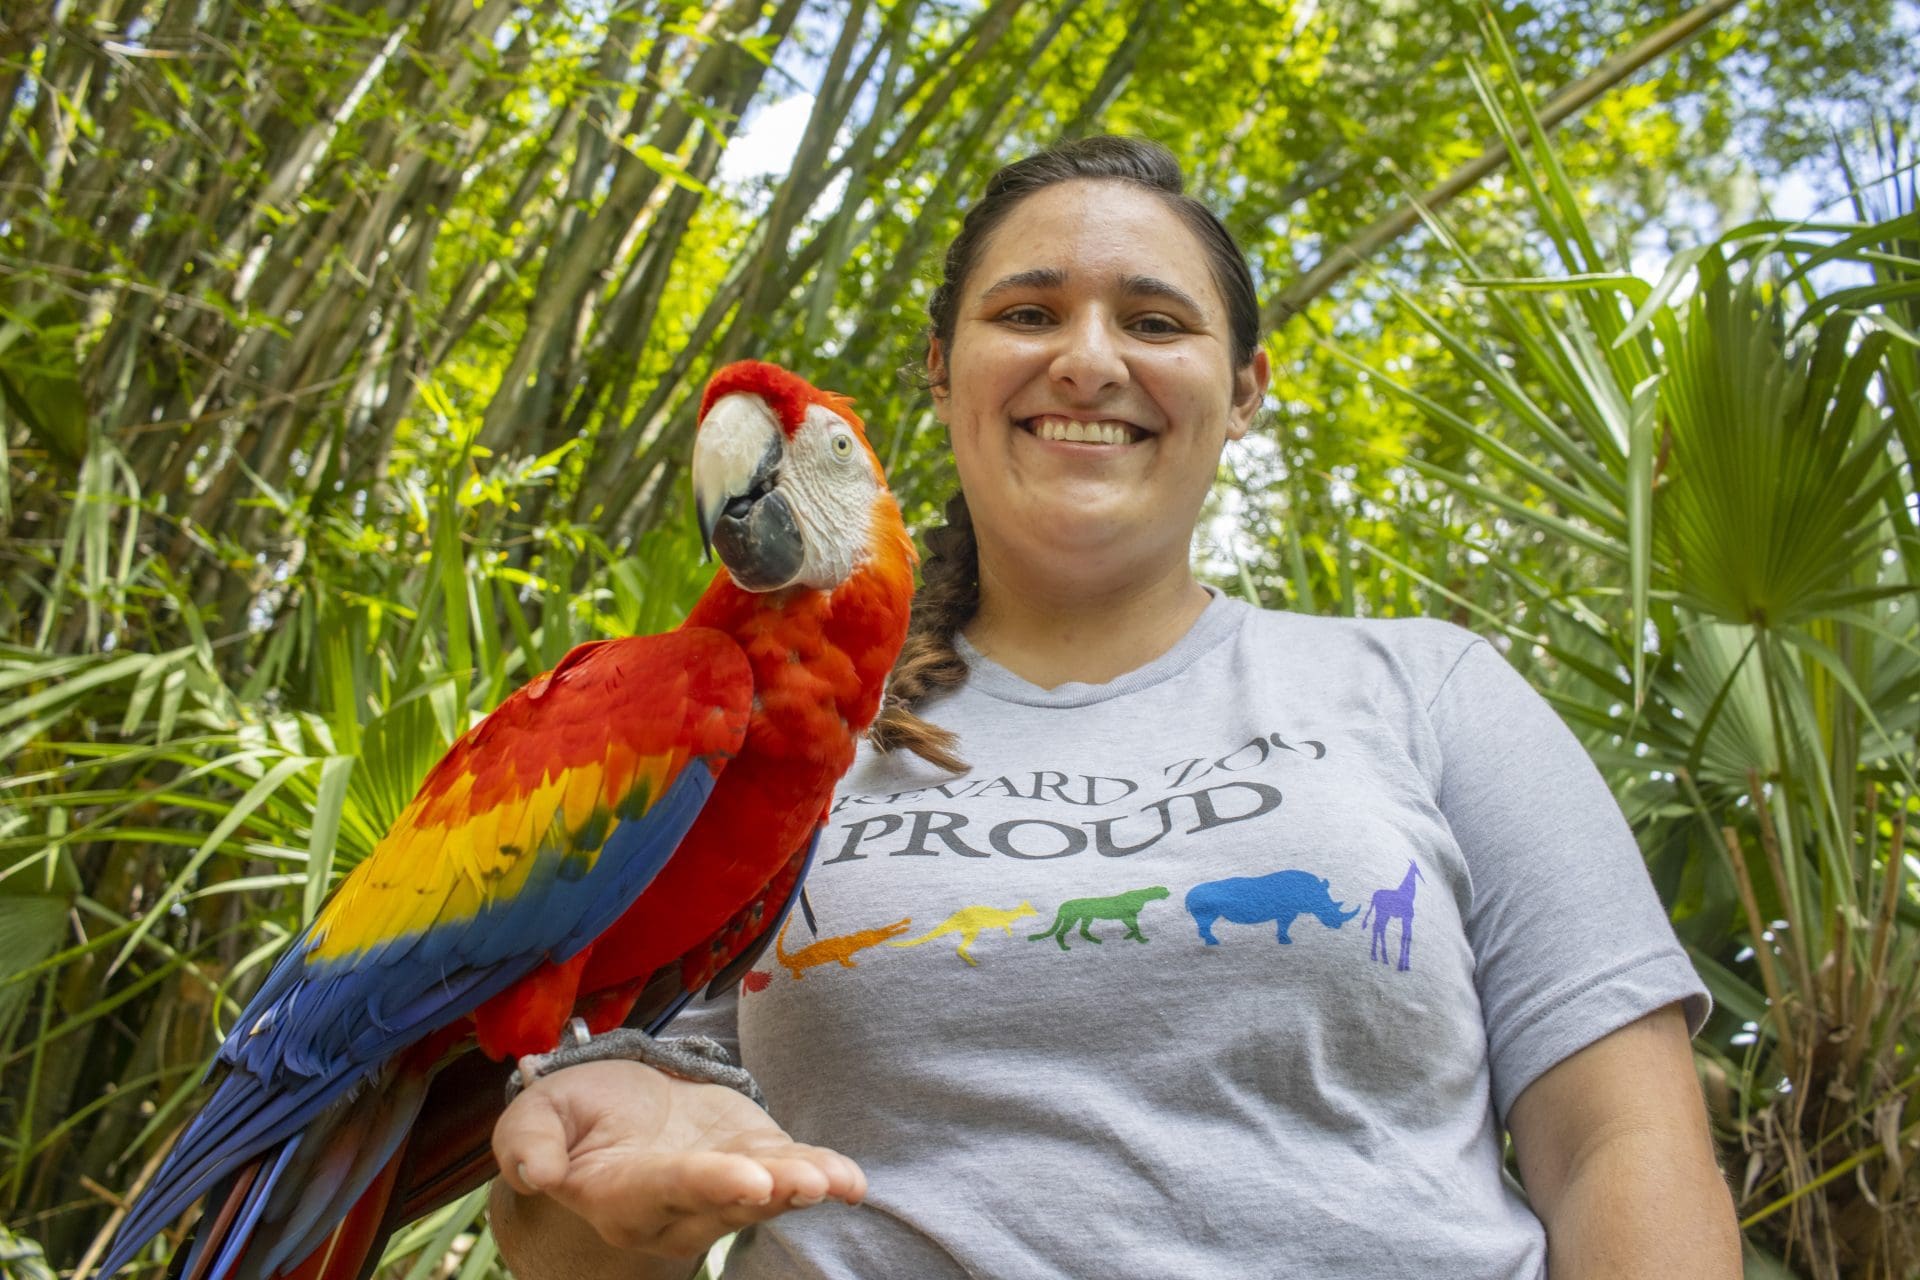 Pride Week photo with Christen and macaw